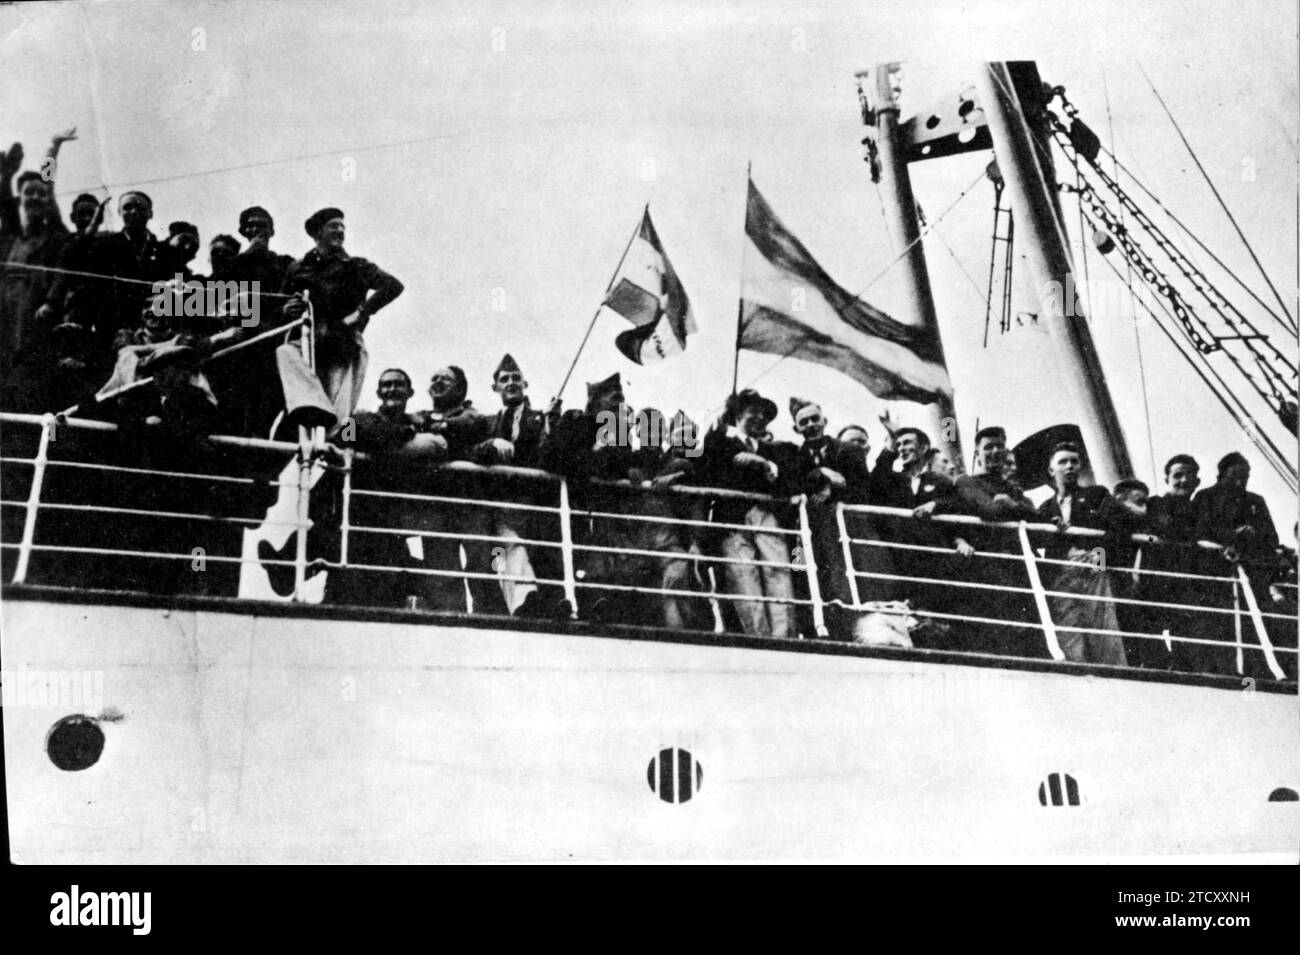 12/31/1937. The 633 Volunteers of O'Duffy's Irish Brigade, who fought alongside the National Troops in the Spanish Civil War, return to Dublin aboard the Portuguese ship Mozambique. Credit: Album / Archivo ABC Stock Photo